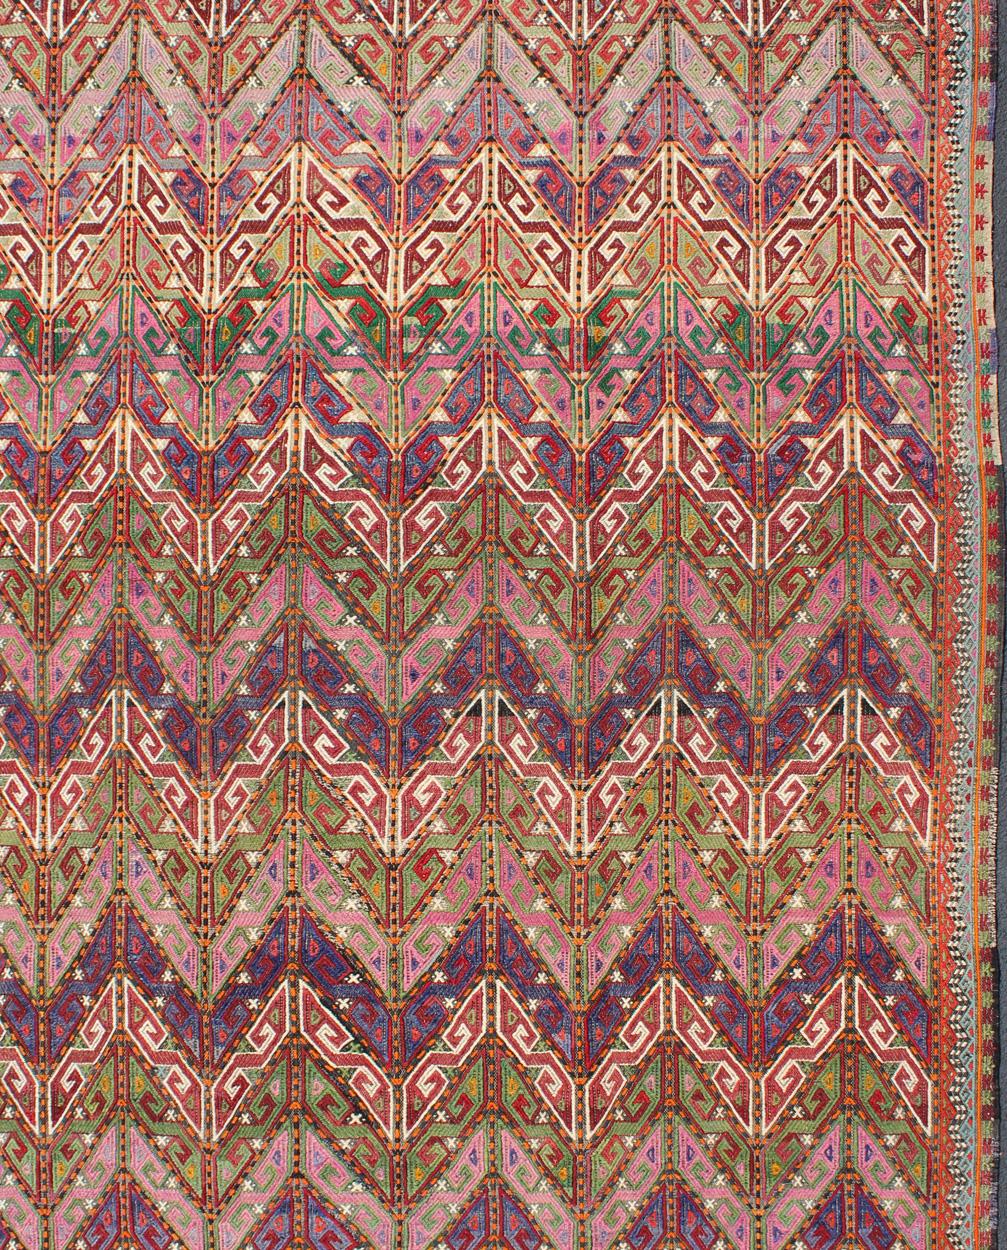 Vintage Turkish flat-weave Tribal Modern kilim with embroideries in multi colors, rug / TU-NED-566.

Rendered in tribal shapes with a spotted and speckled assortment of geometric elements, this unique midcentury vintage Turkish Kilim showcases an